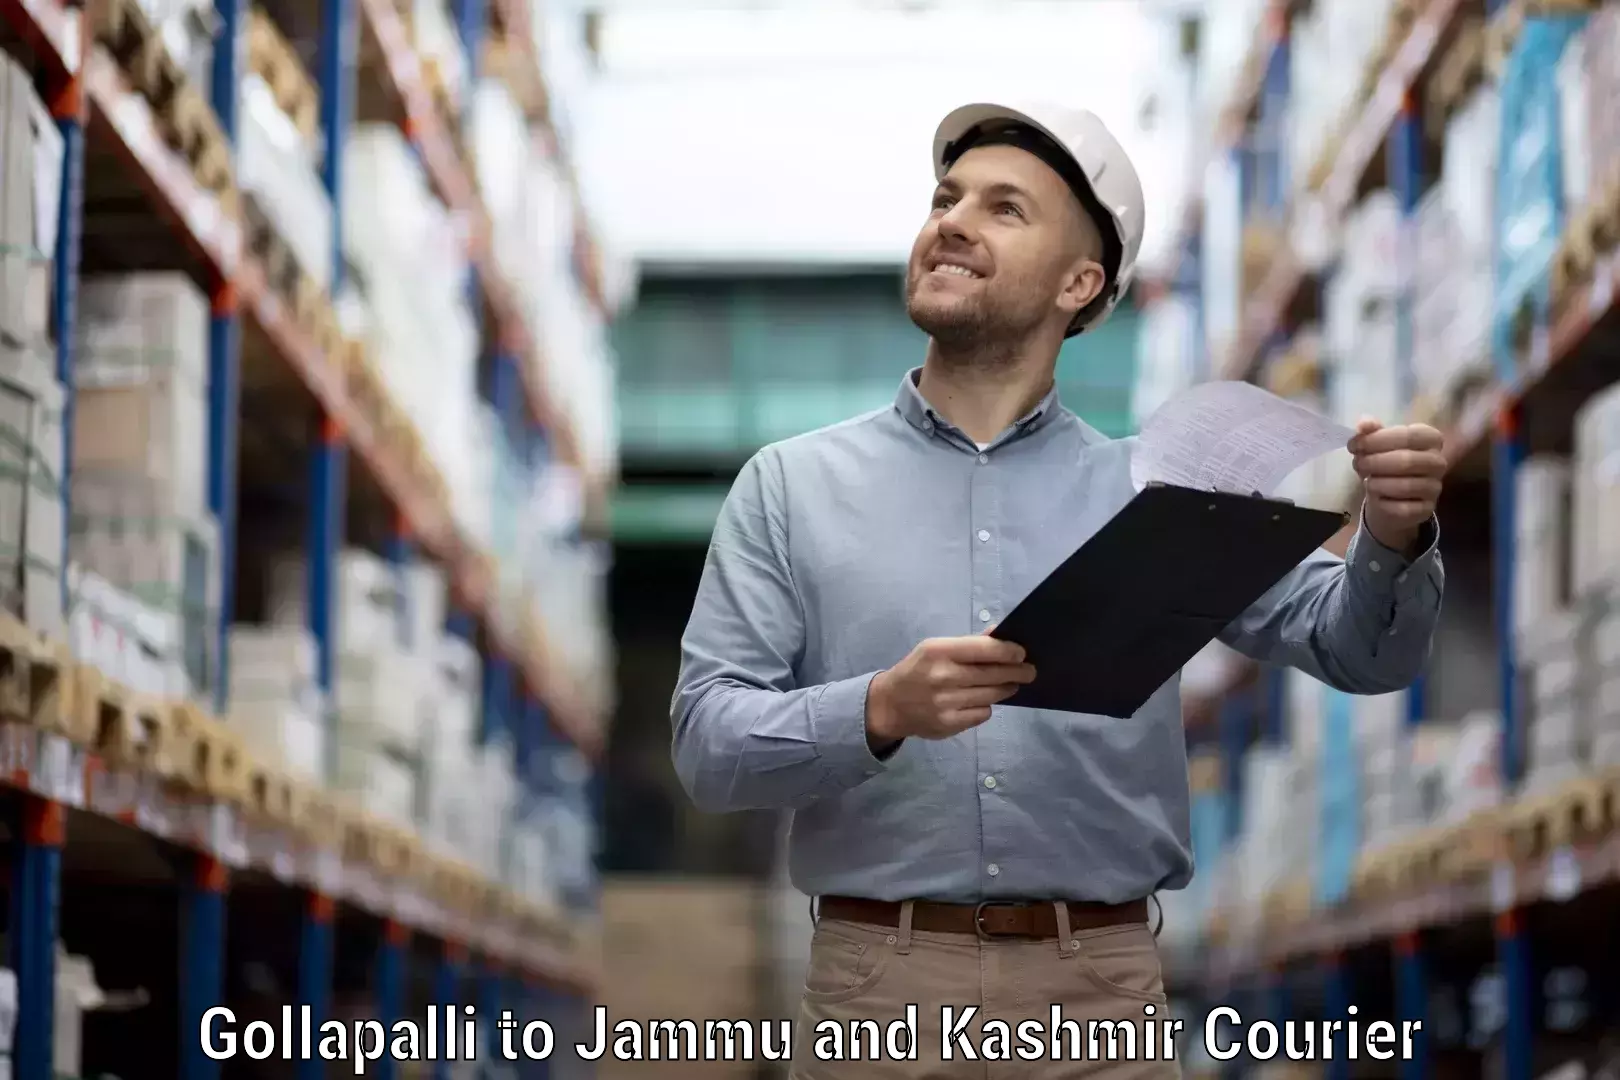 Urban courier service Gollapalli to Pulwama